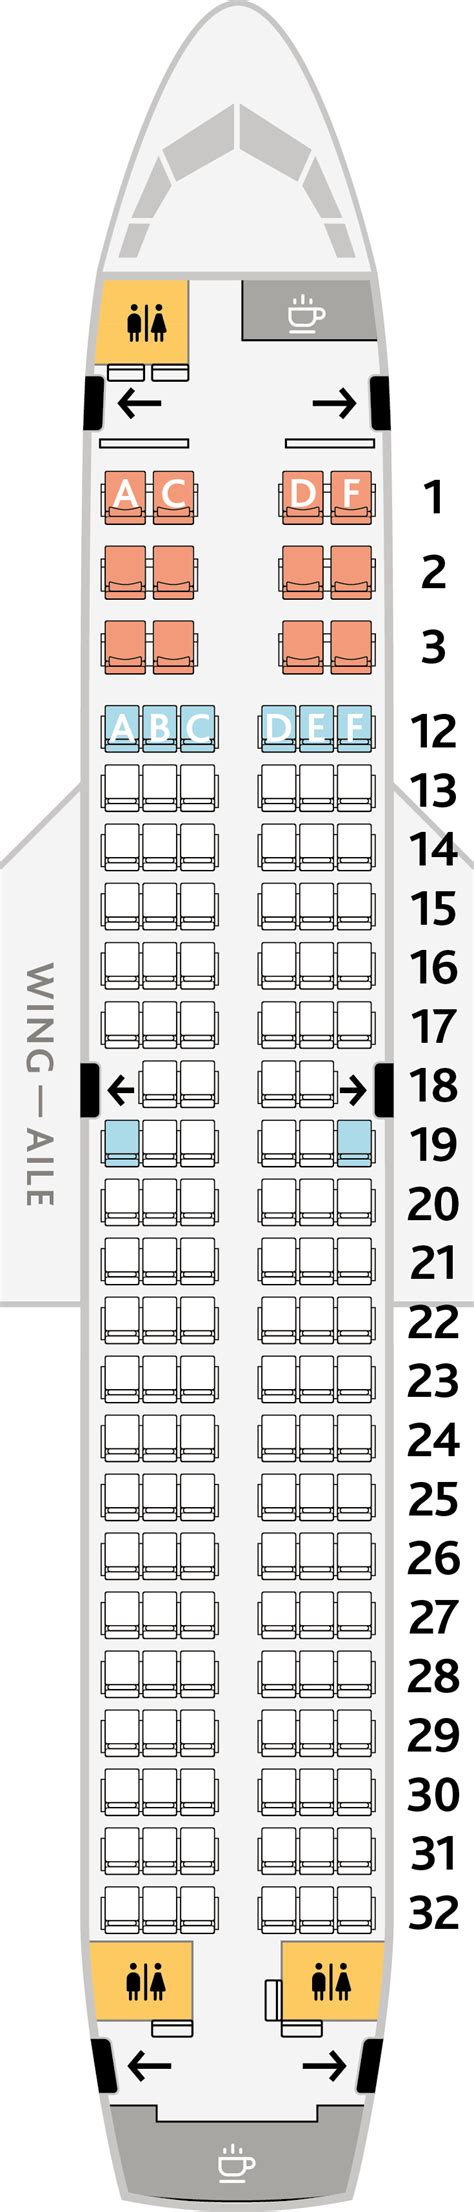 air canada seat selection for flights